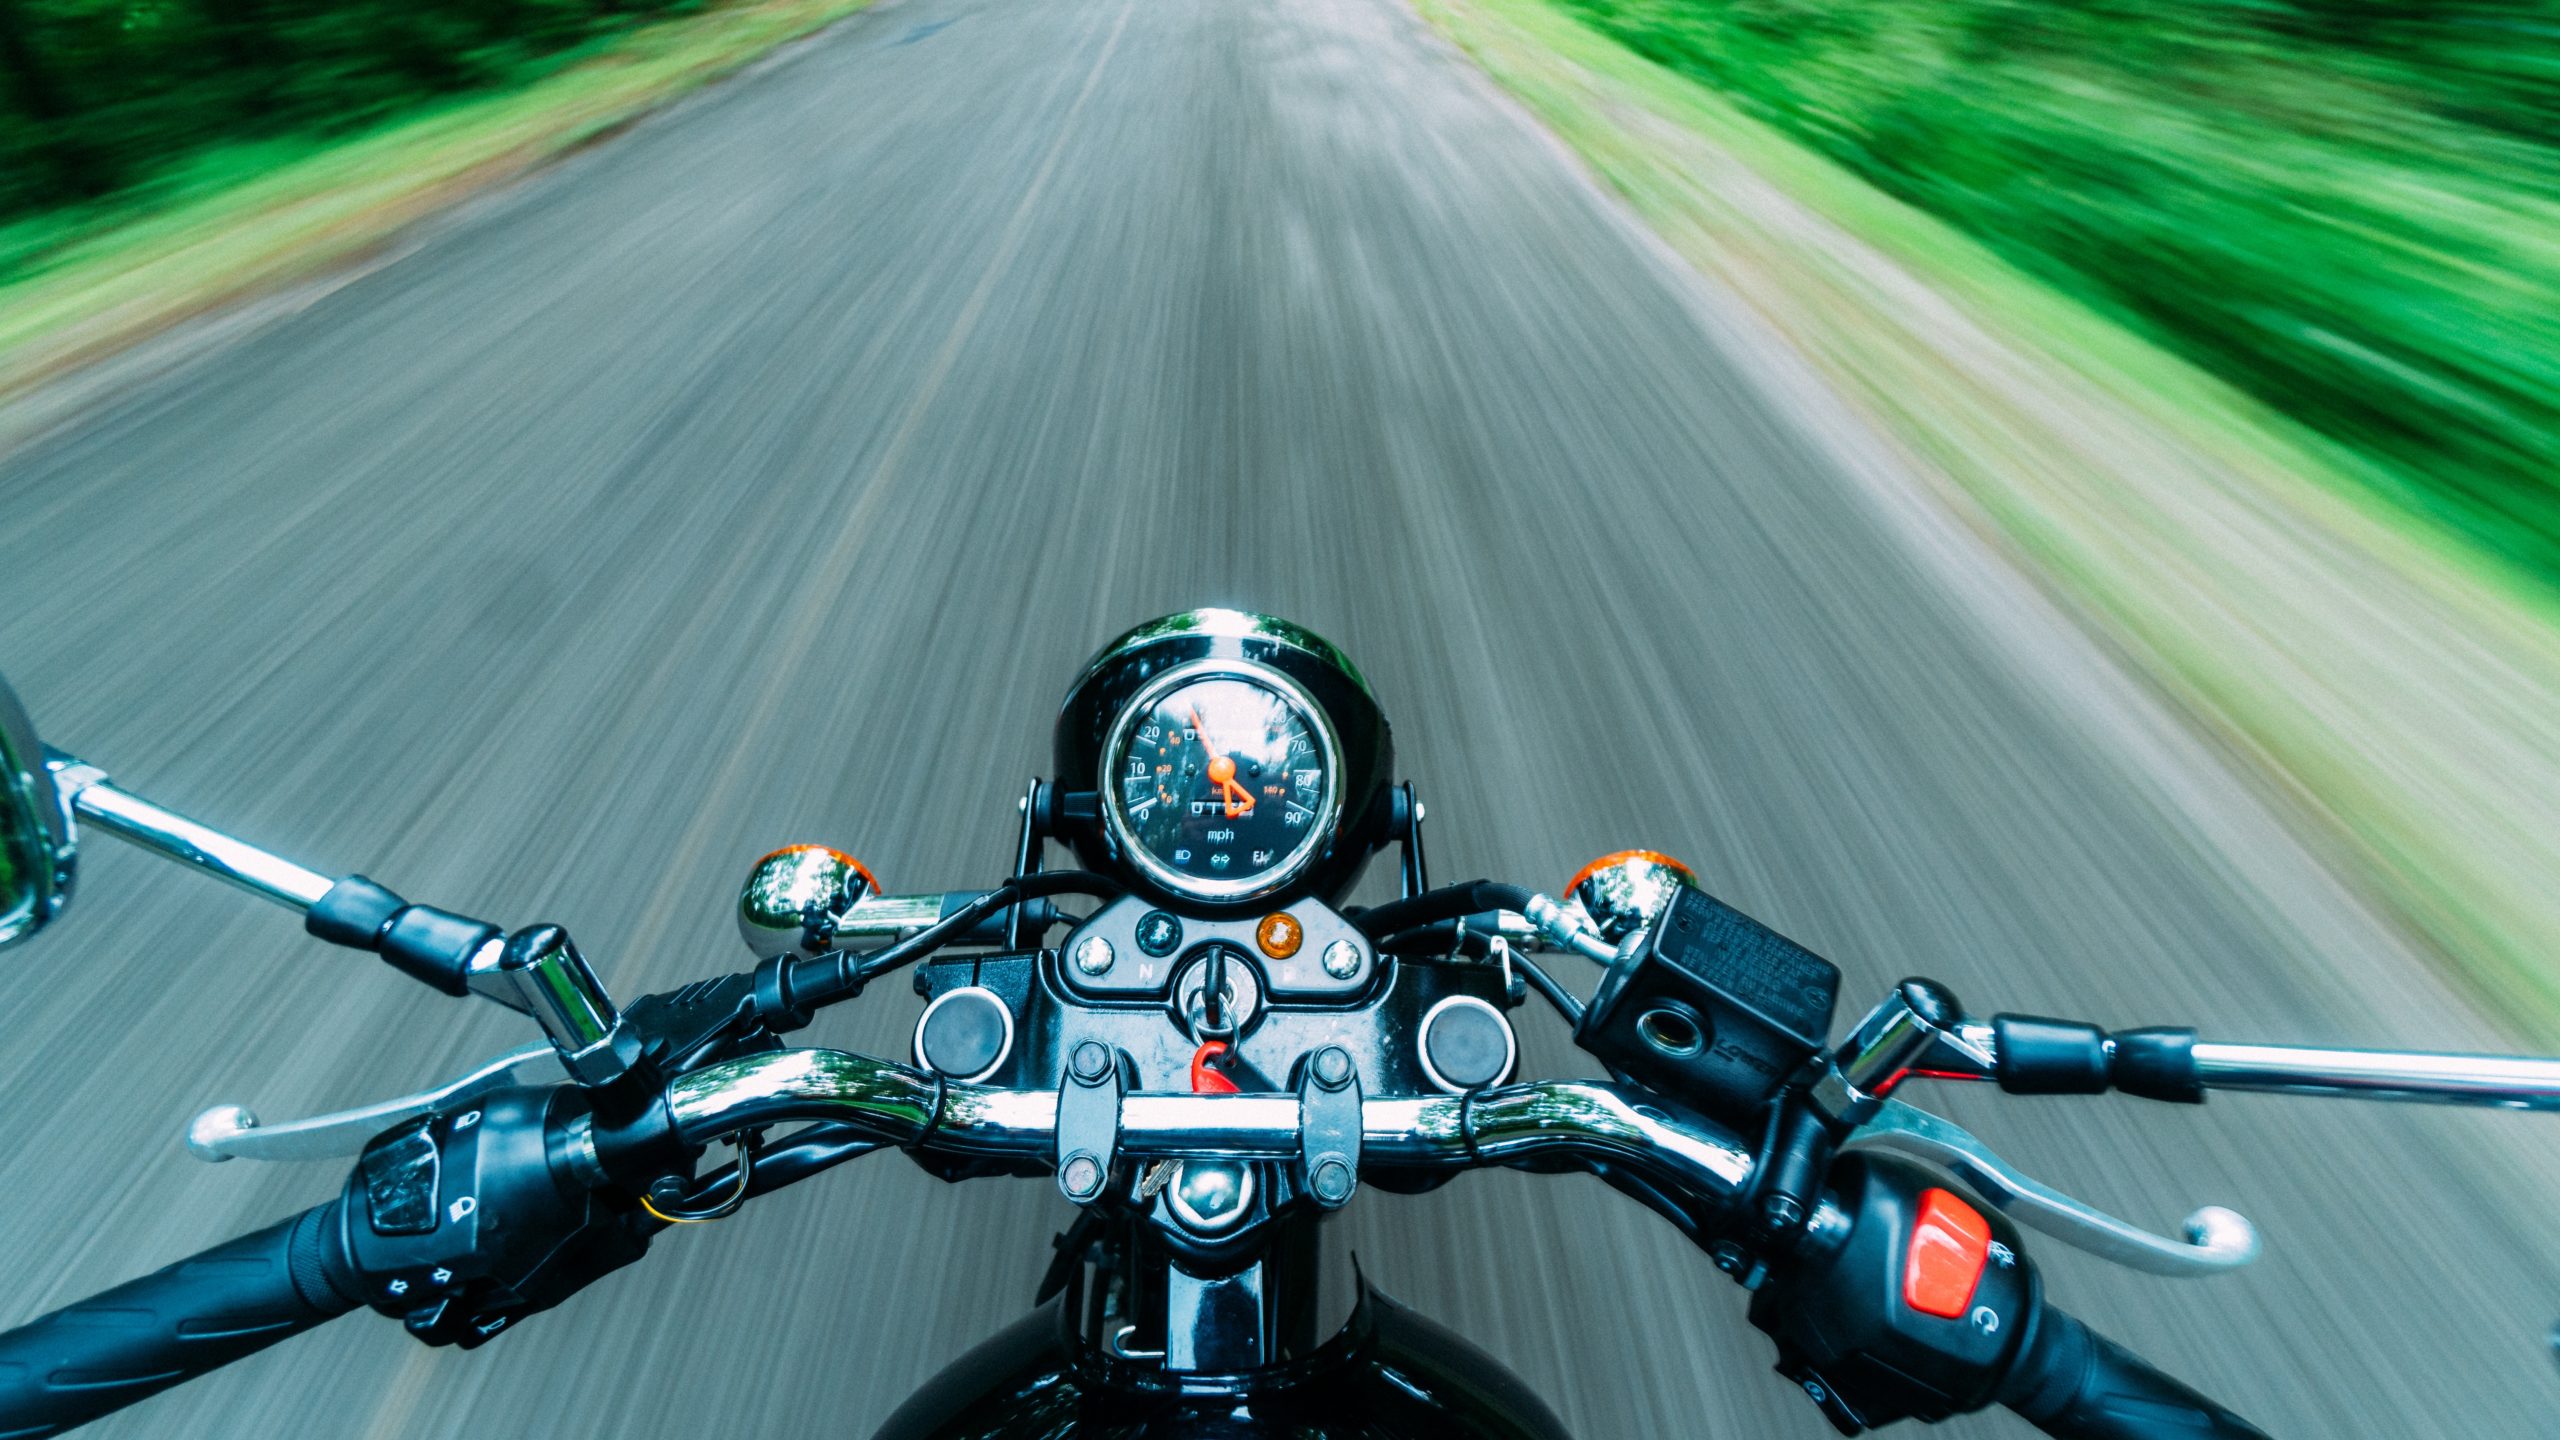 Motorcycle Road image by pexels-kelly-lacy